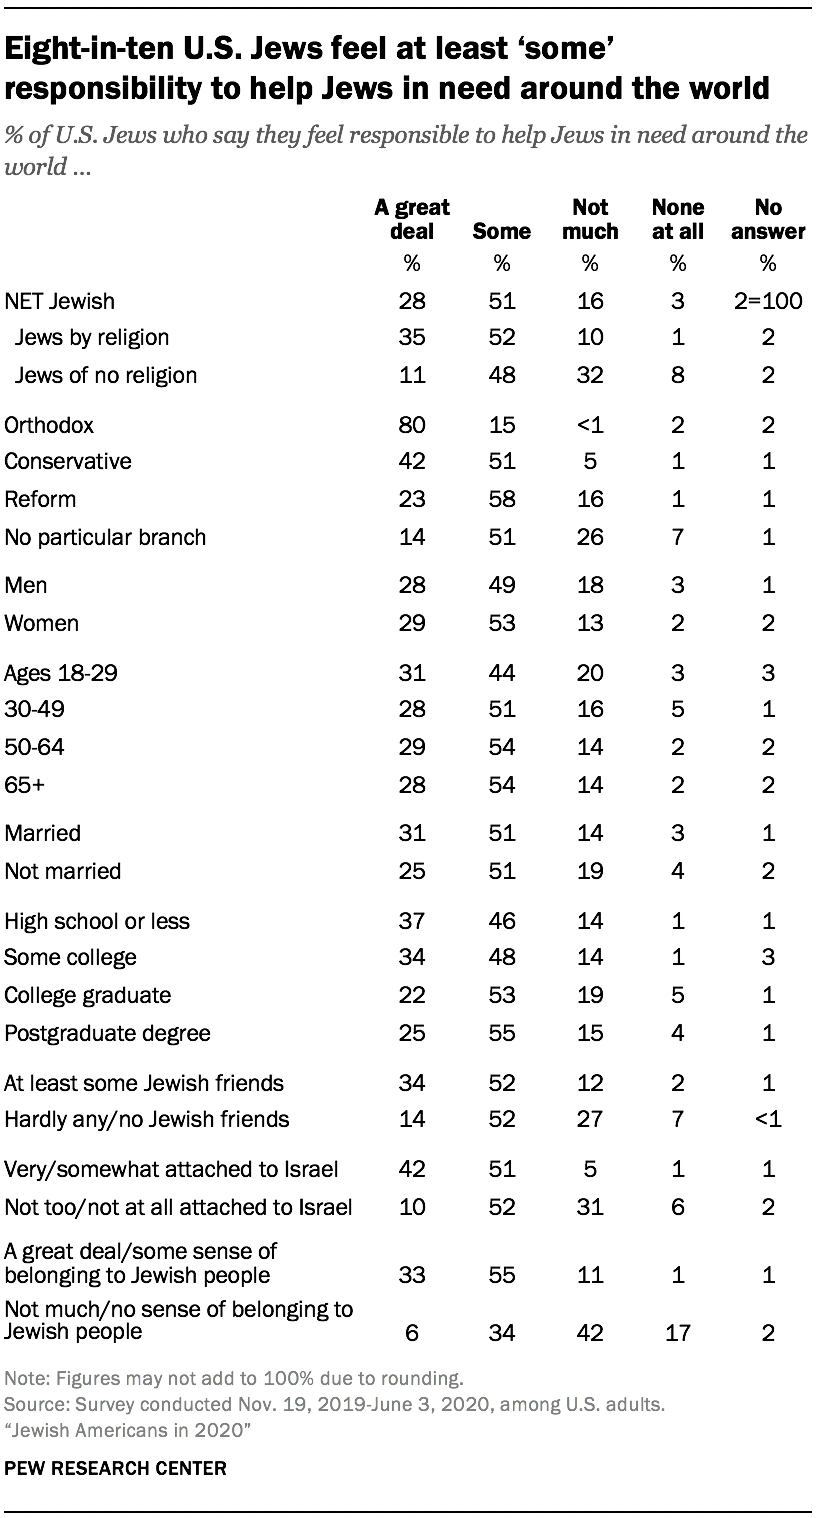 Eight-in-ten U.S. Jews feel at least ‘some’ responsibility to help Jews in need around the world